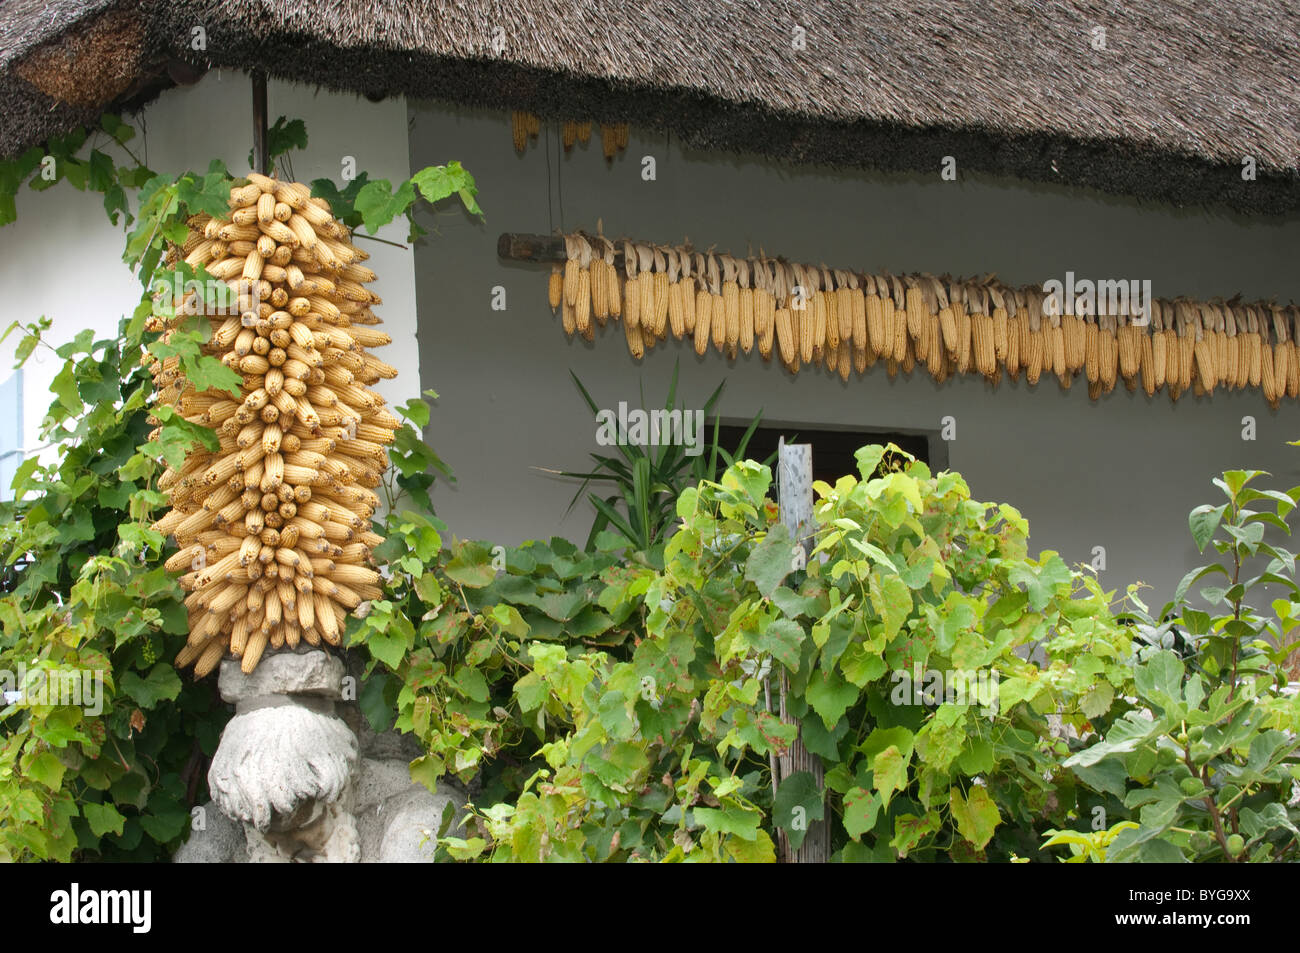 Maize, Corn (Zea mays). Corn cobs hung up for drying under the eaves of a roof, Podersdorf, Lake Neusiedl, Austria. Stock Photo